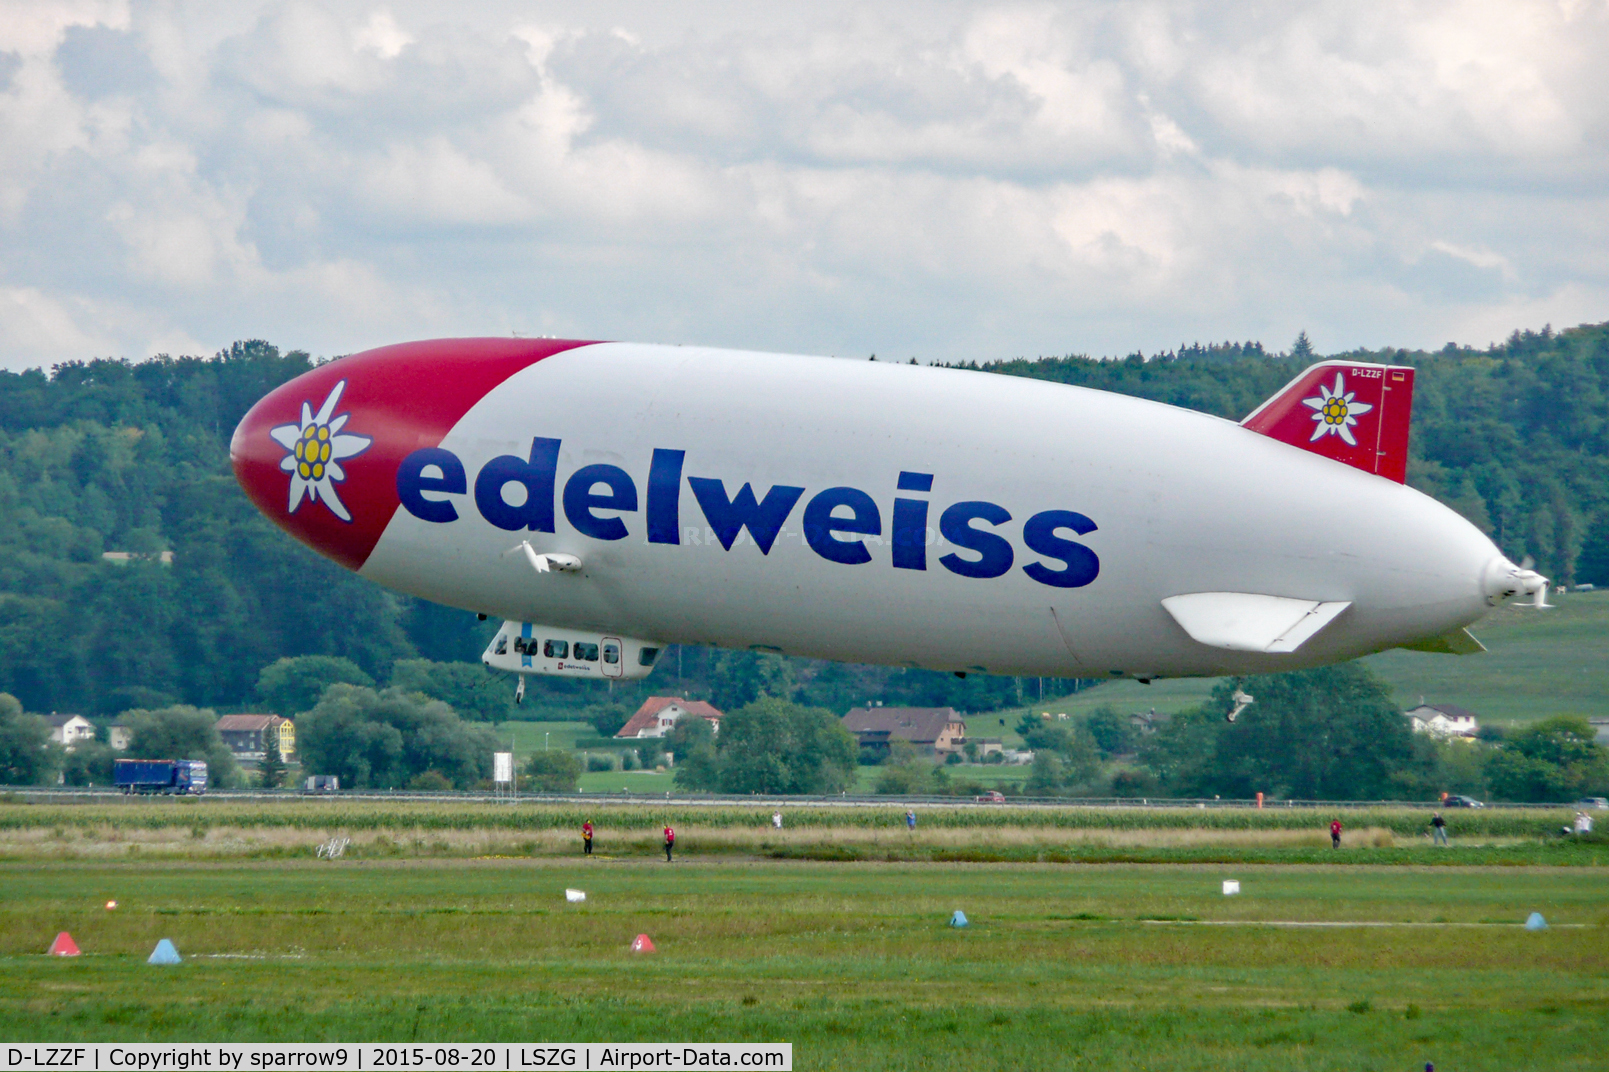 D-LZZF, 1998 Zeppelin NT07 C/N 3, Arriving at Grenchen